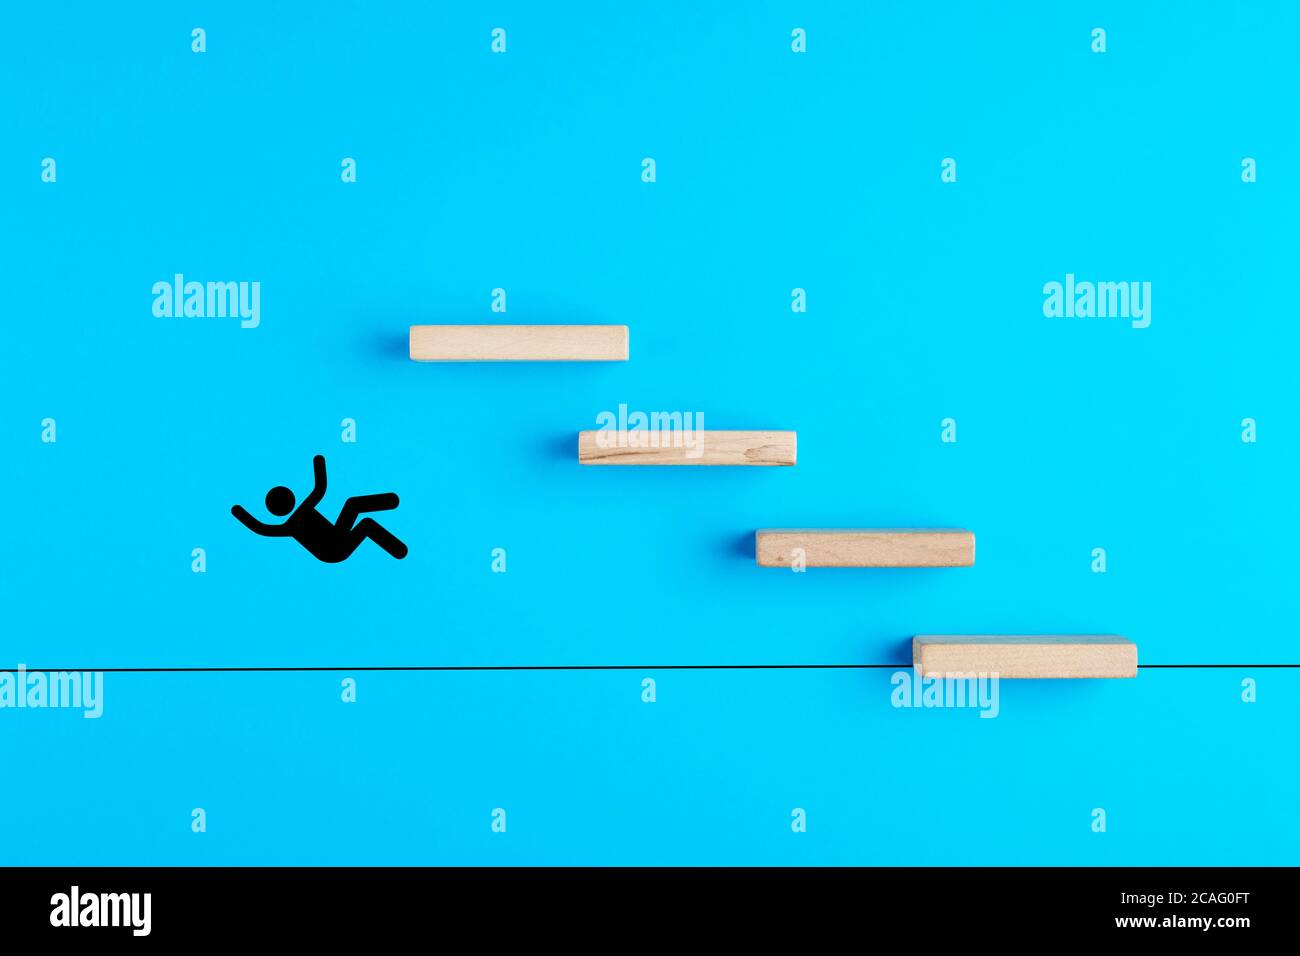 Stickman is falling down from the wooden stairs on blue background. Failure, downfall or stepping off the top in business concept. Stock Photo